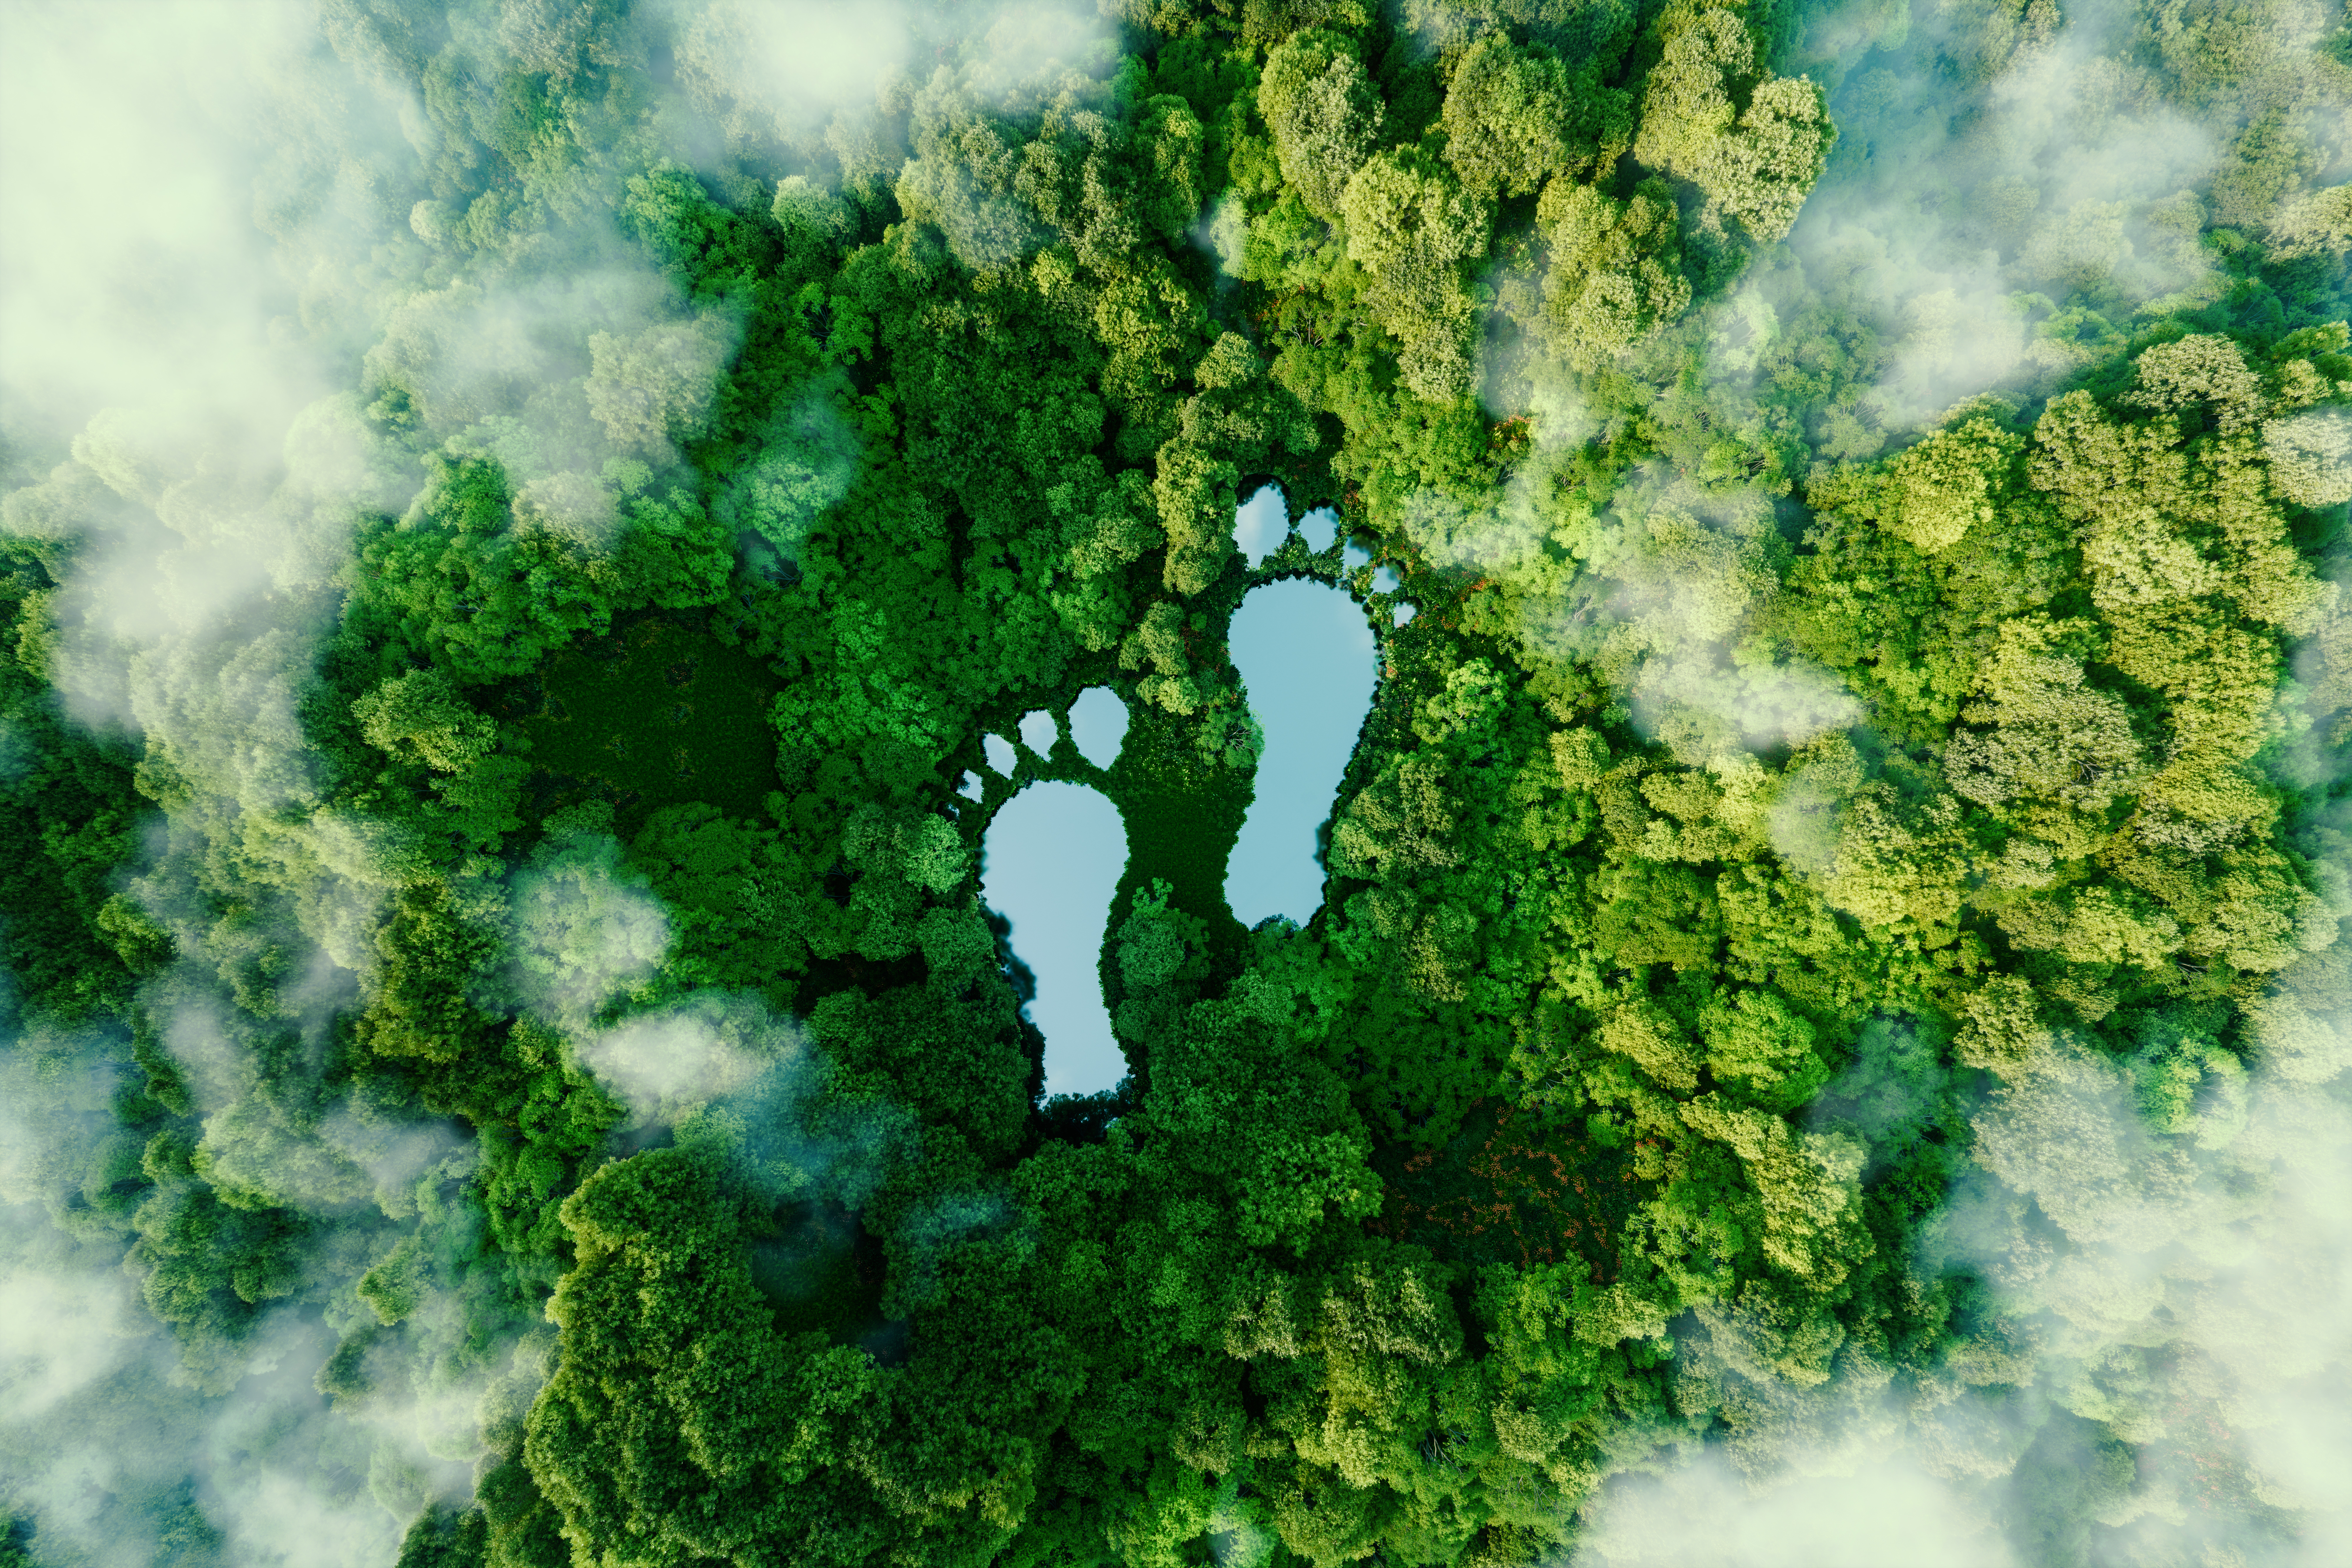 What's the ecological footprint of your practice?